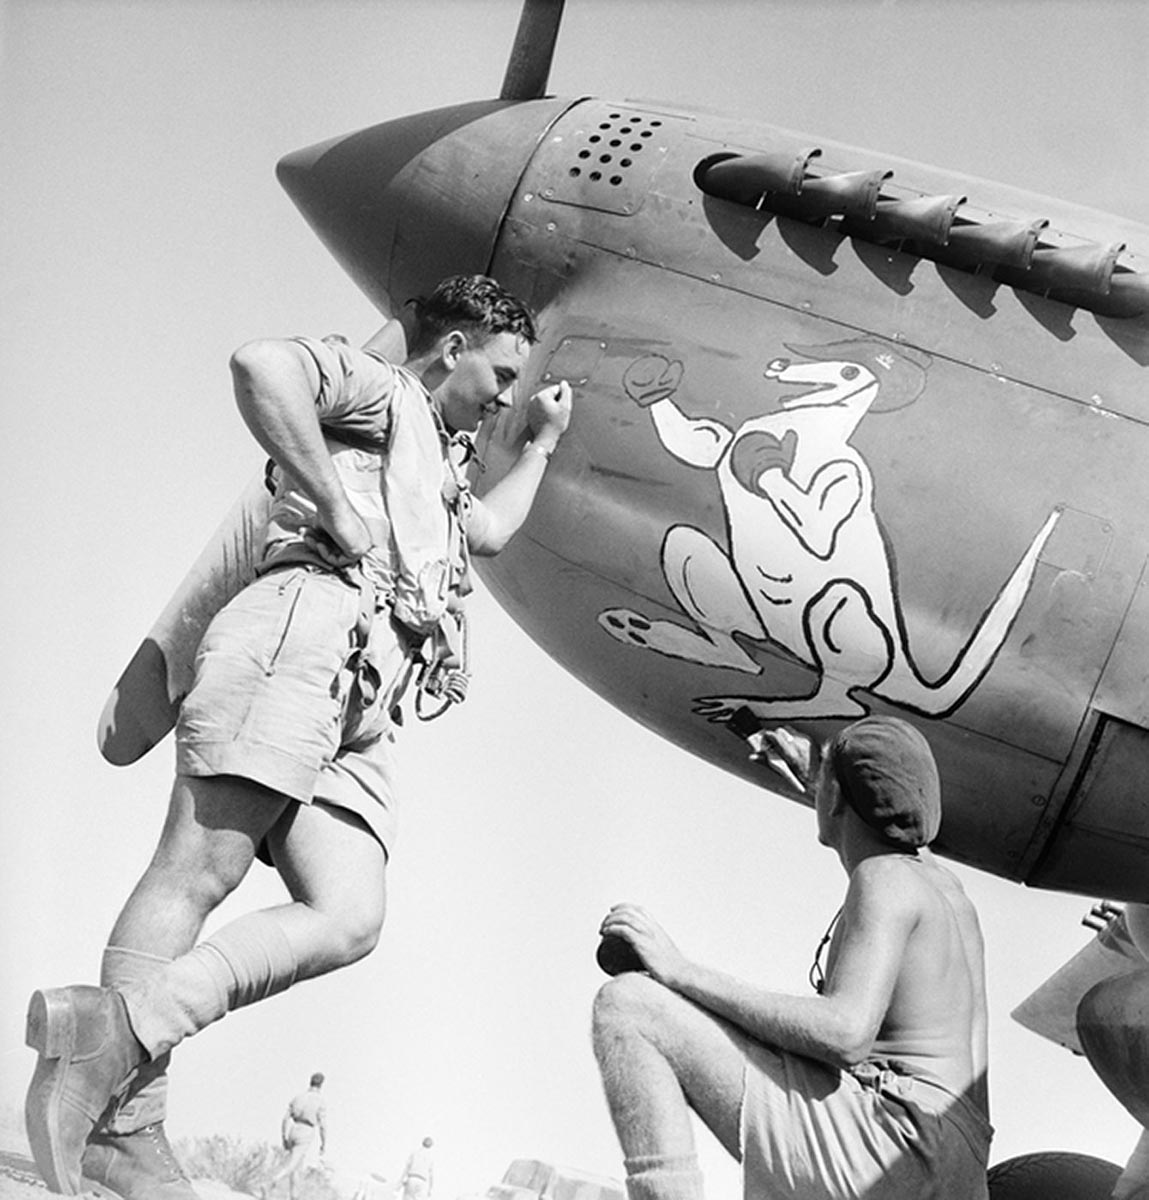 A black and white photograph taken at Agnone. Flying Officer D Davidson (left) of Sydney, NSW, looks on whilst his fitter, 16528 Leading Aircraftman Jack Ronald Clifford Featherby (right) of Sydney, NSW, puts the finishing touches to some nose art, a boxing kangaroo, which some (possibly a flight), of the 'Desert Harassers' of No 450 (Kittyhawk) Squadron, RAAF, have adopted as an insignia during operations over Sicily and Italy. - click to view larger image